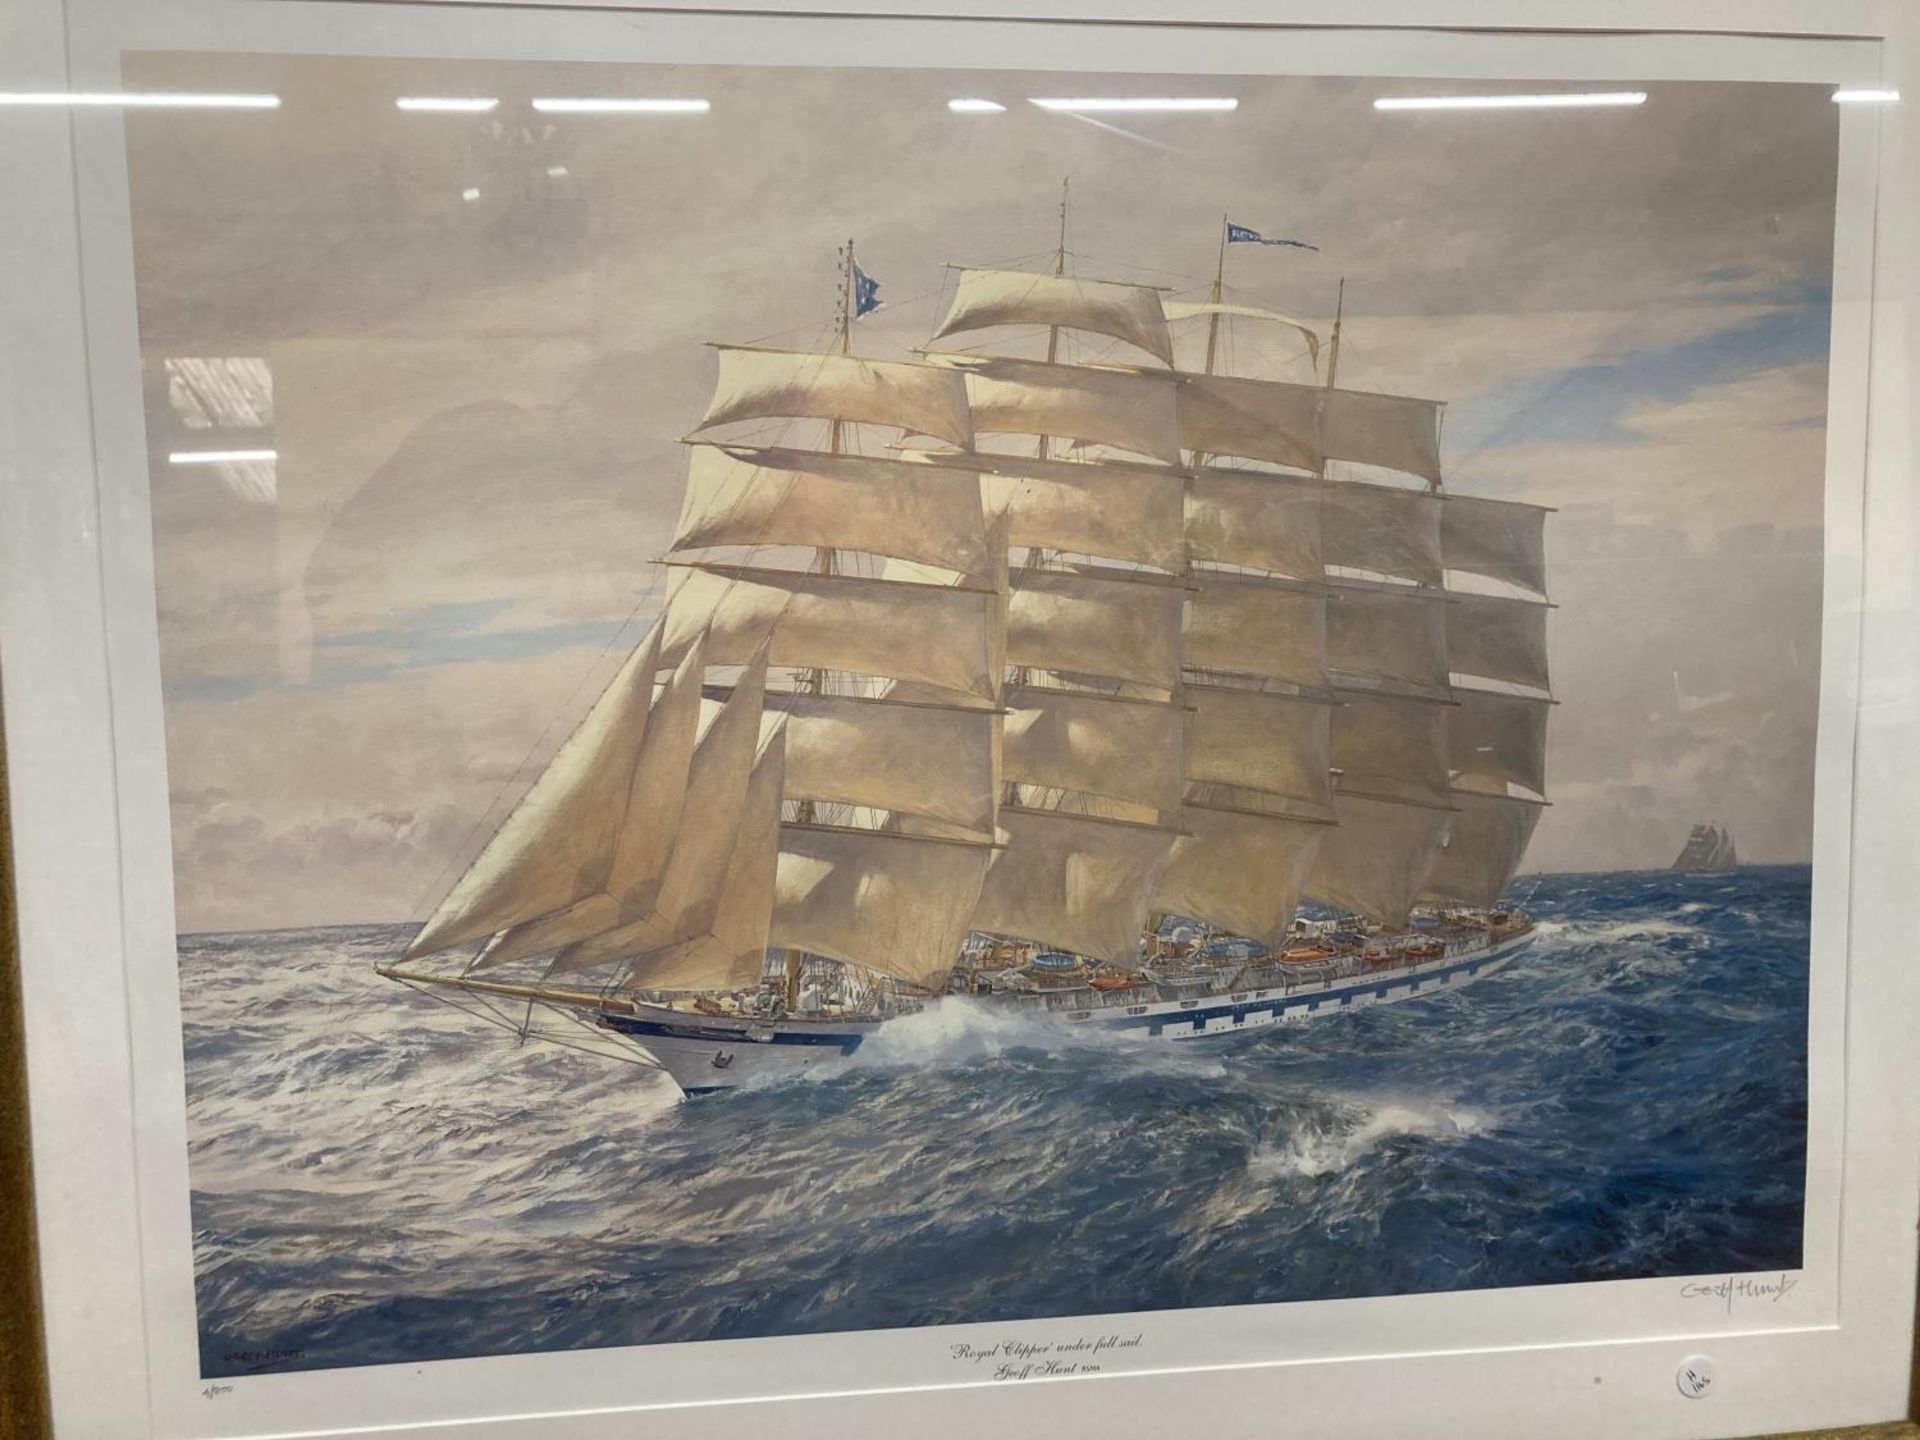 A LARGE GILT FRAMED SIGNED LIMITED EDITION PRINT OF ROYAL CLIPPER UNDER FULL SAIL BY GEOFF HUNT NO.4 - Image 2 of 5